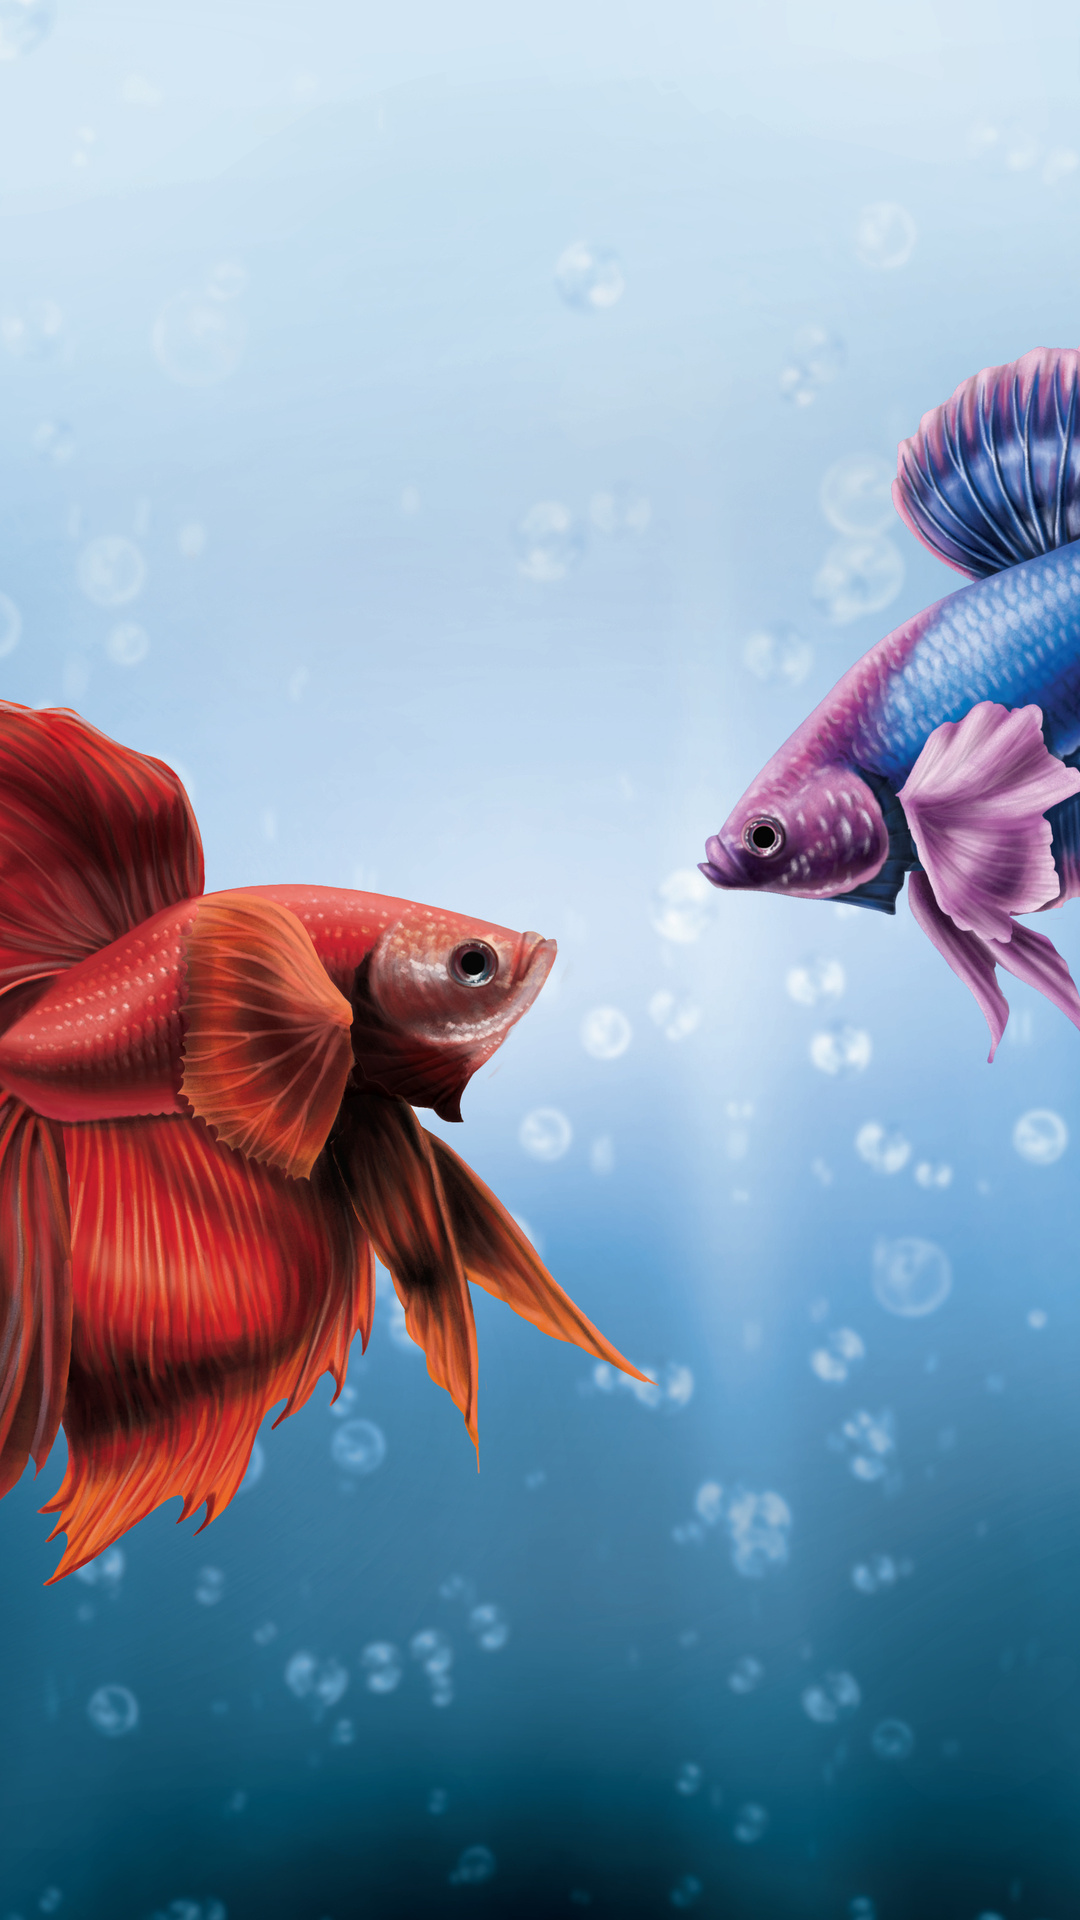 Him And I Betta Fish iPhone 6s, 6 Plus, Pixel xl , One Plus 3t, 5 HD 4k Wallpaper, Image, Background, Photo and Picture